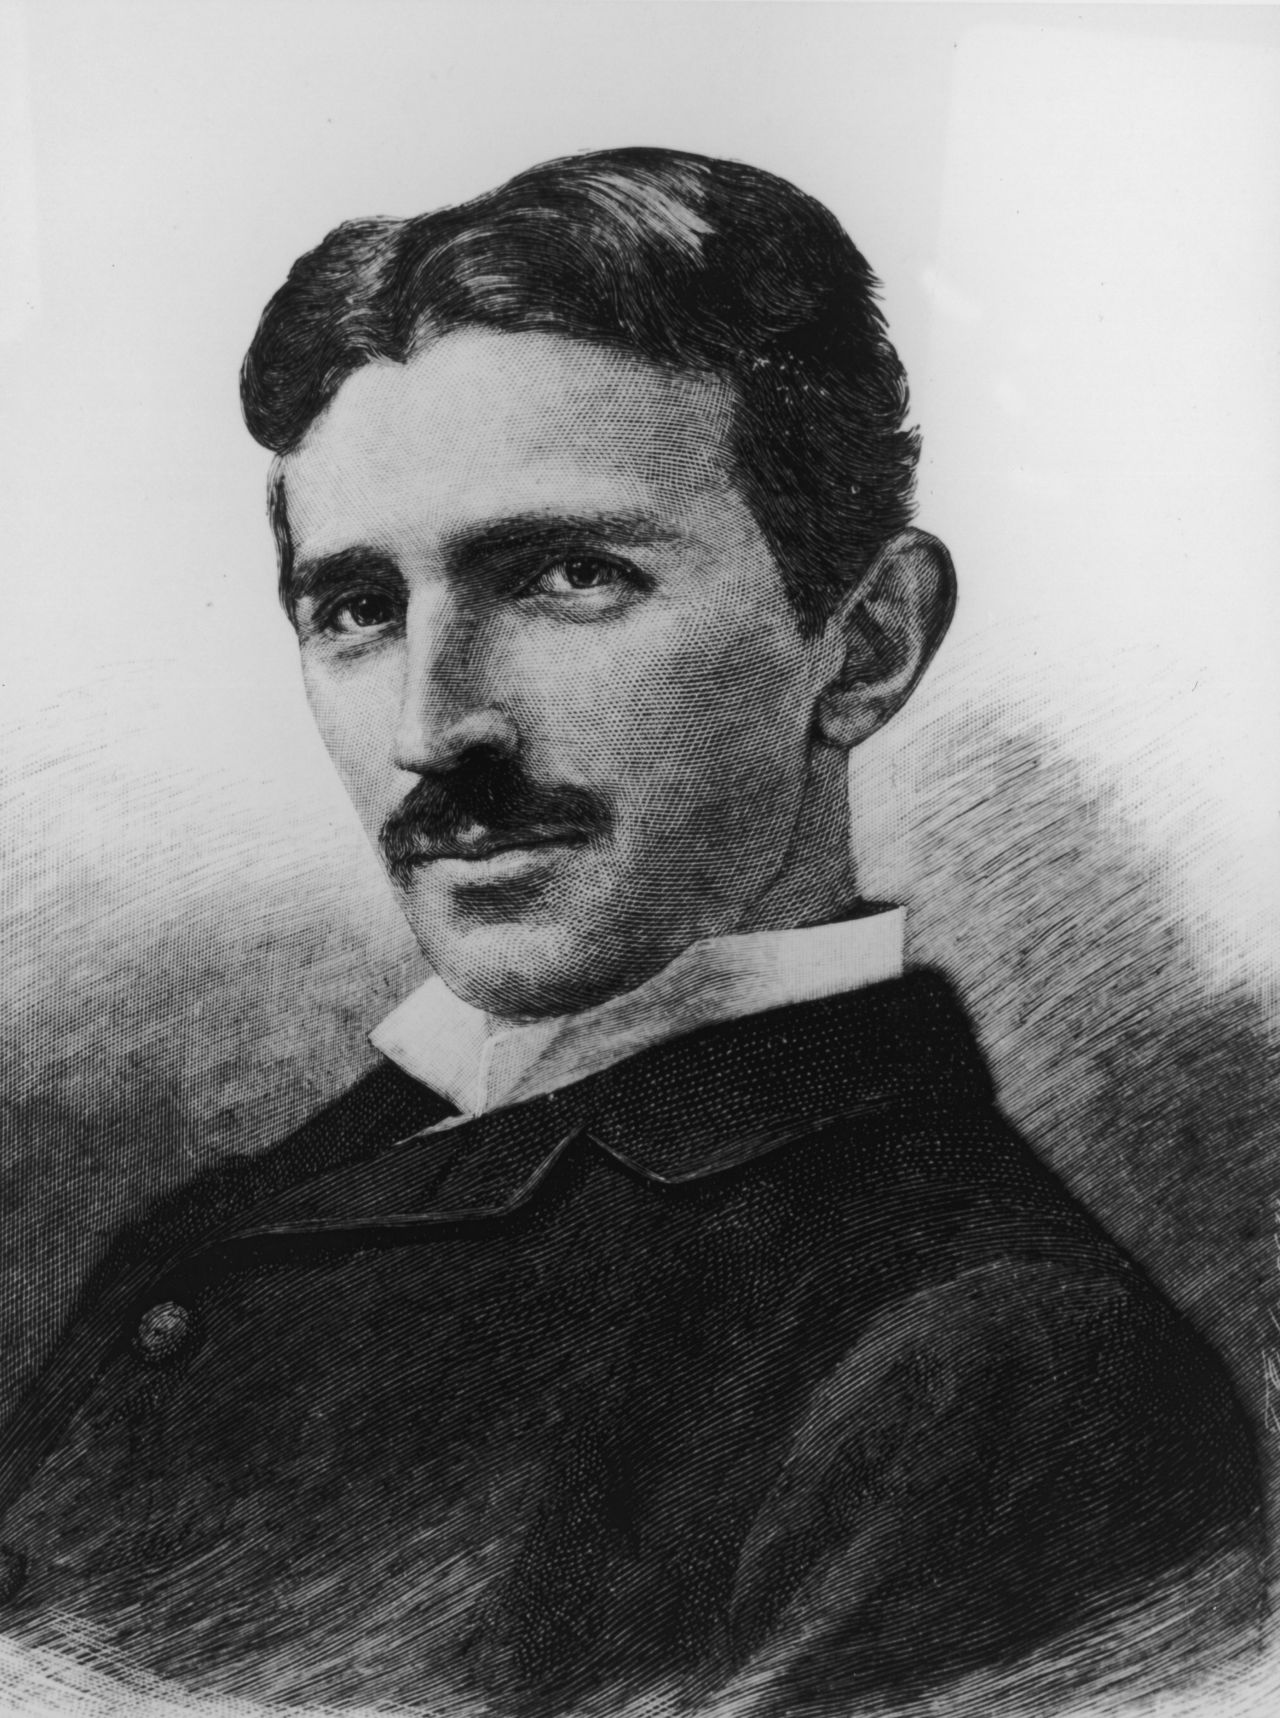 But the invention belonged to legendary scientist Nikola Tesla, and the patent was restored to him after his death. 